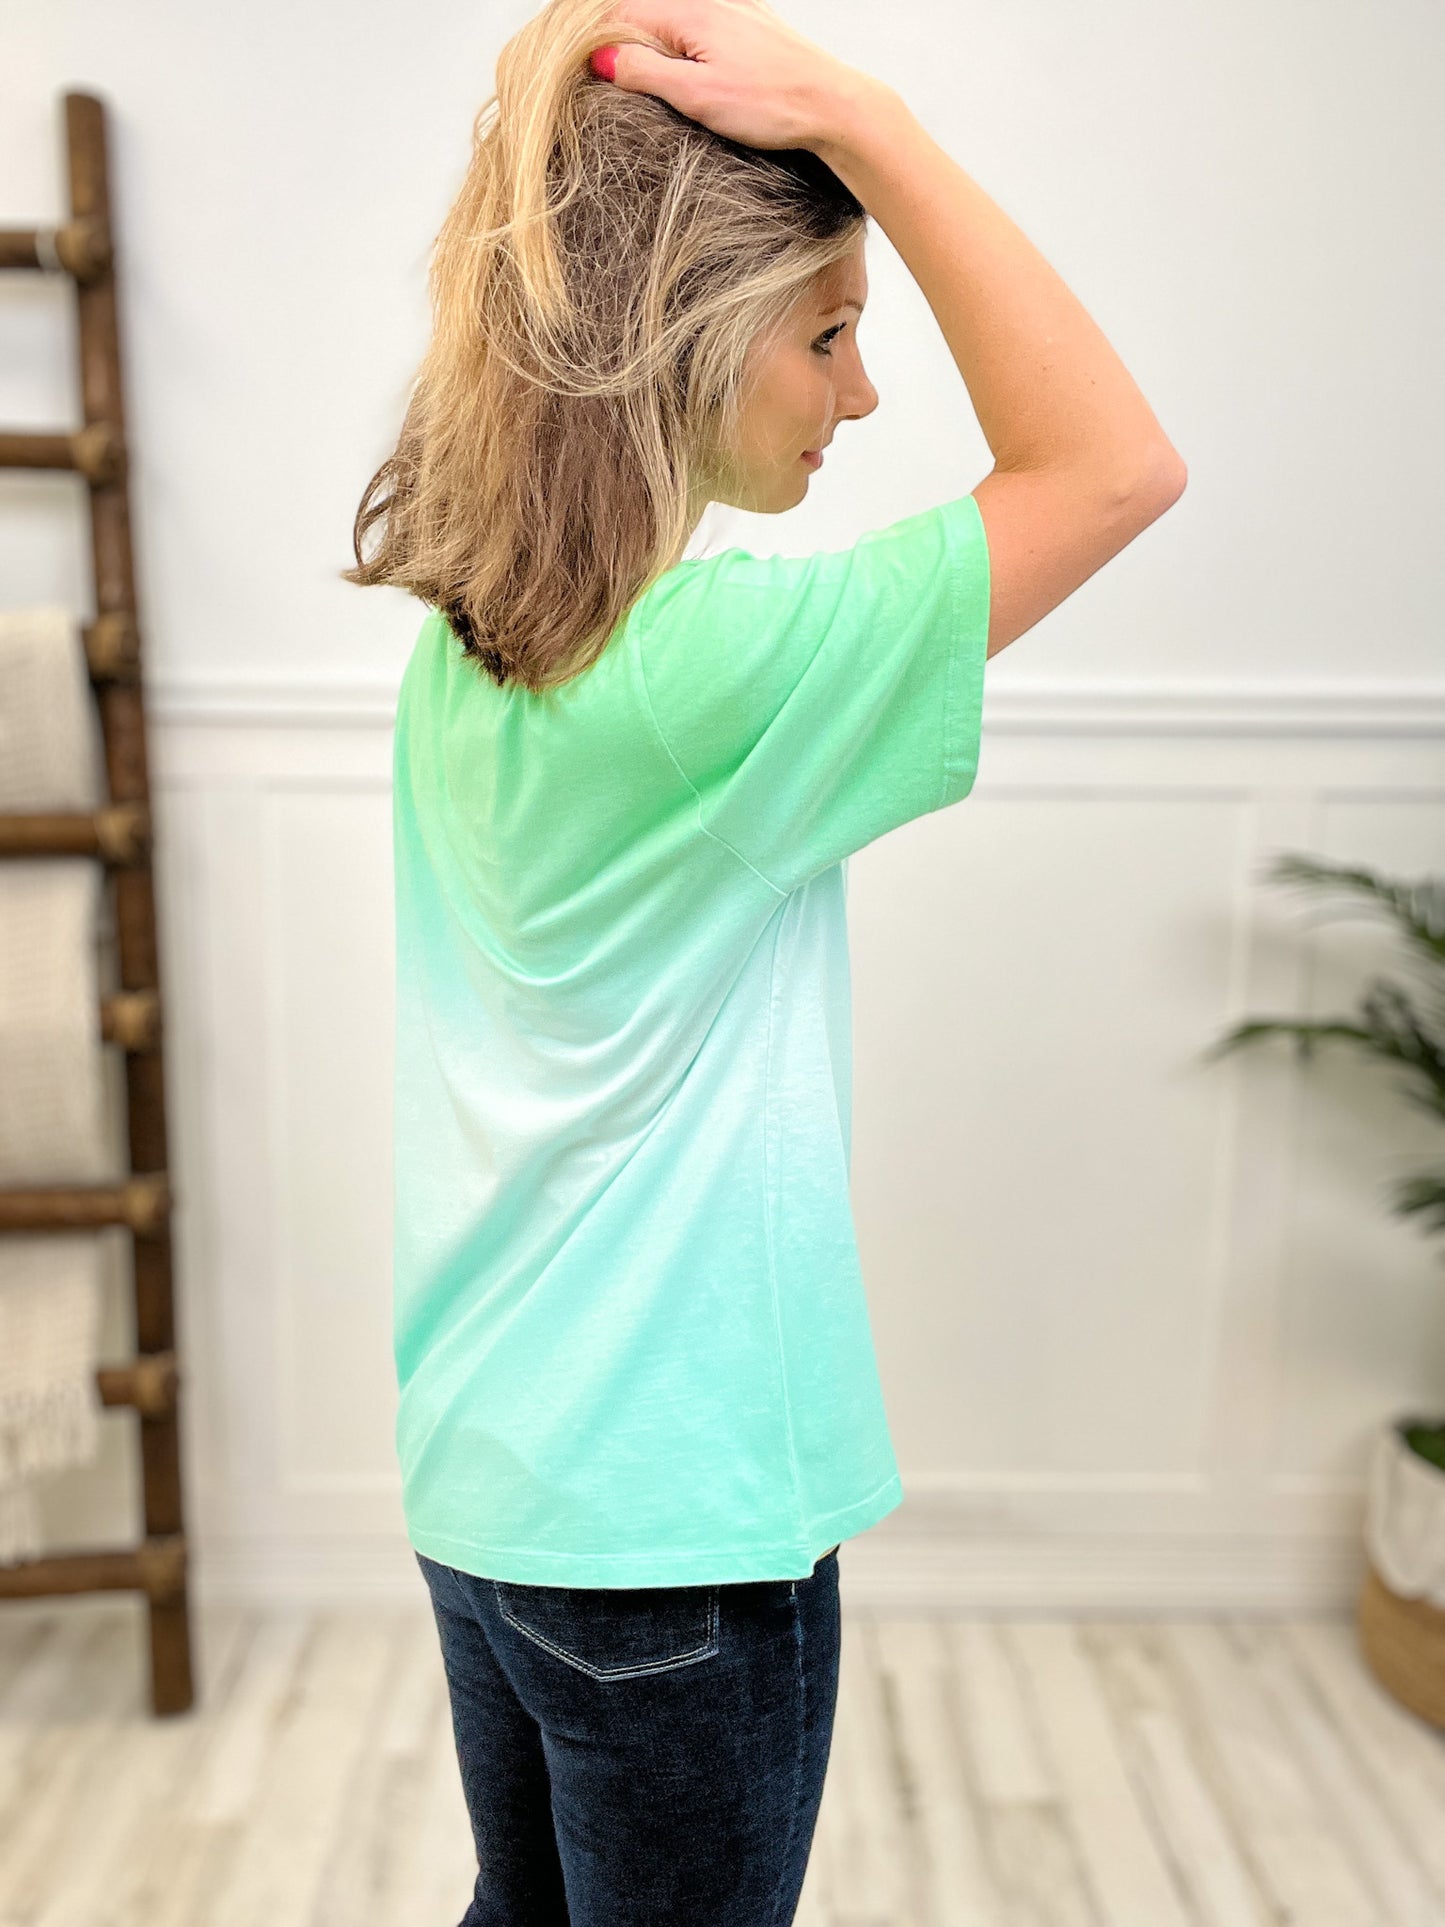 Ride or Dye Boxy Top More Colors!